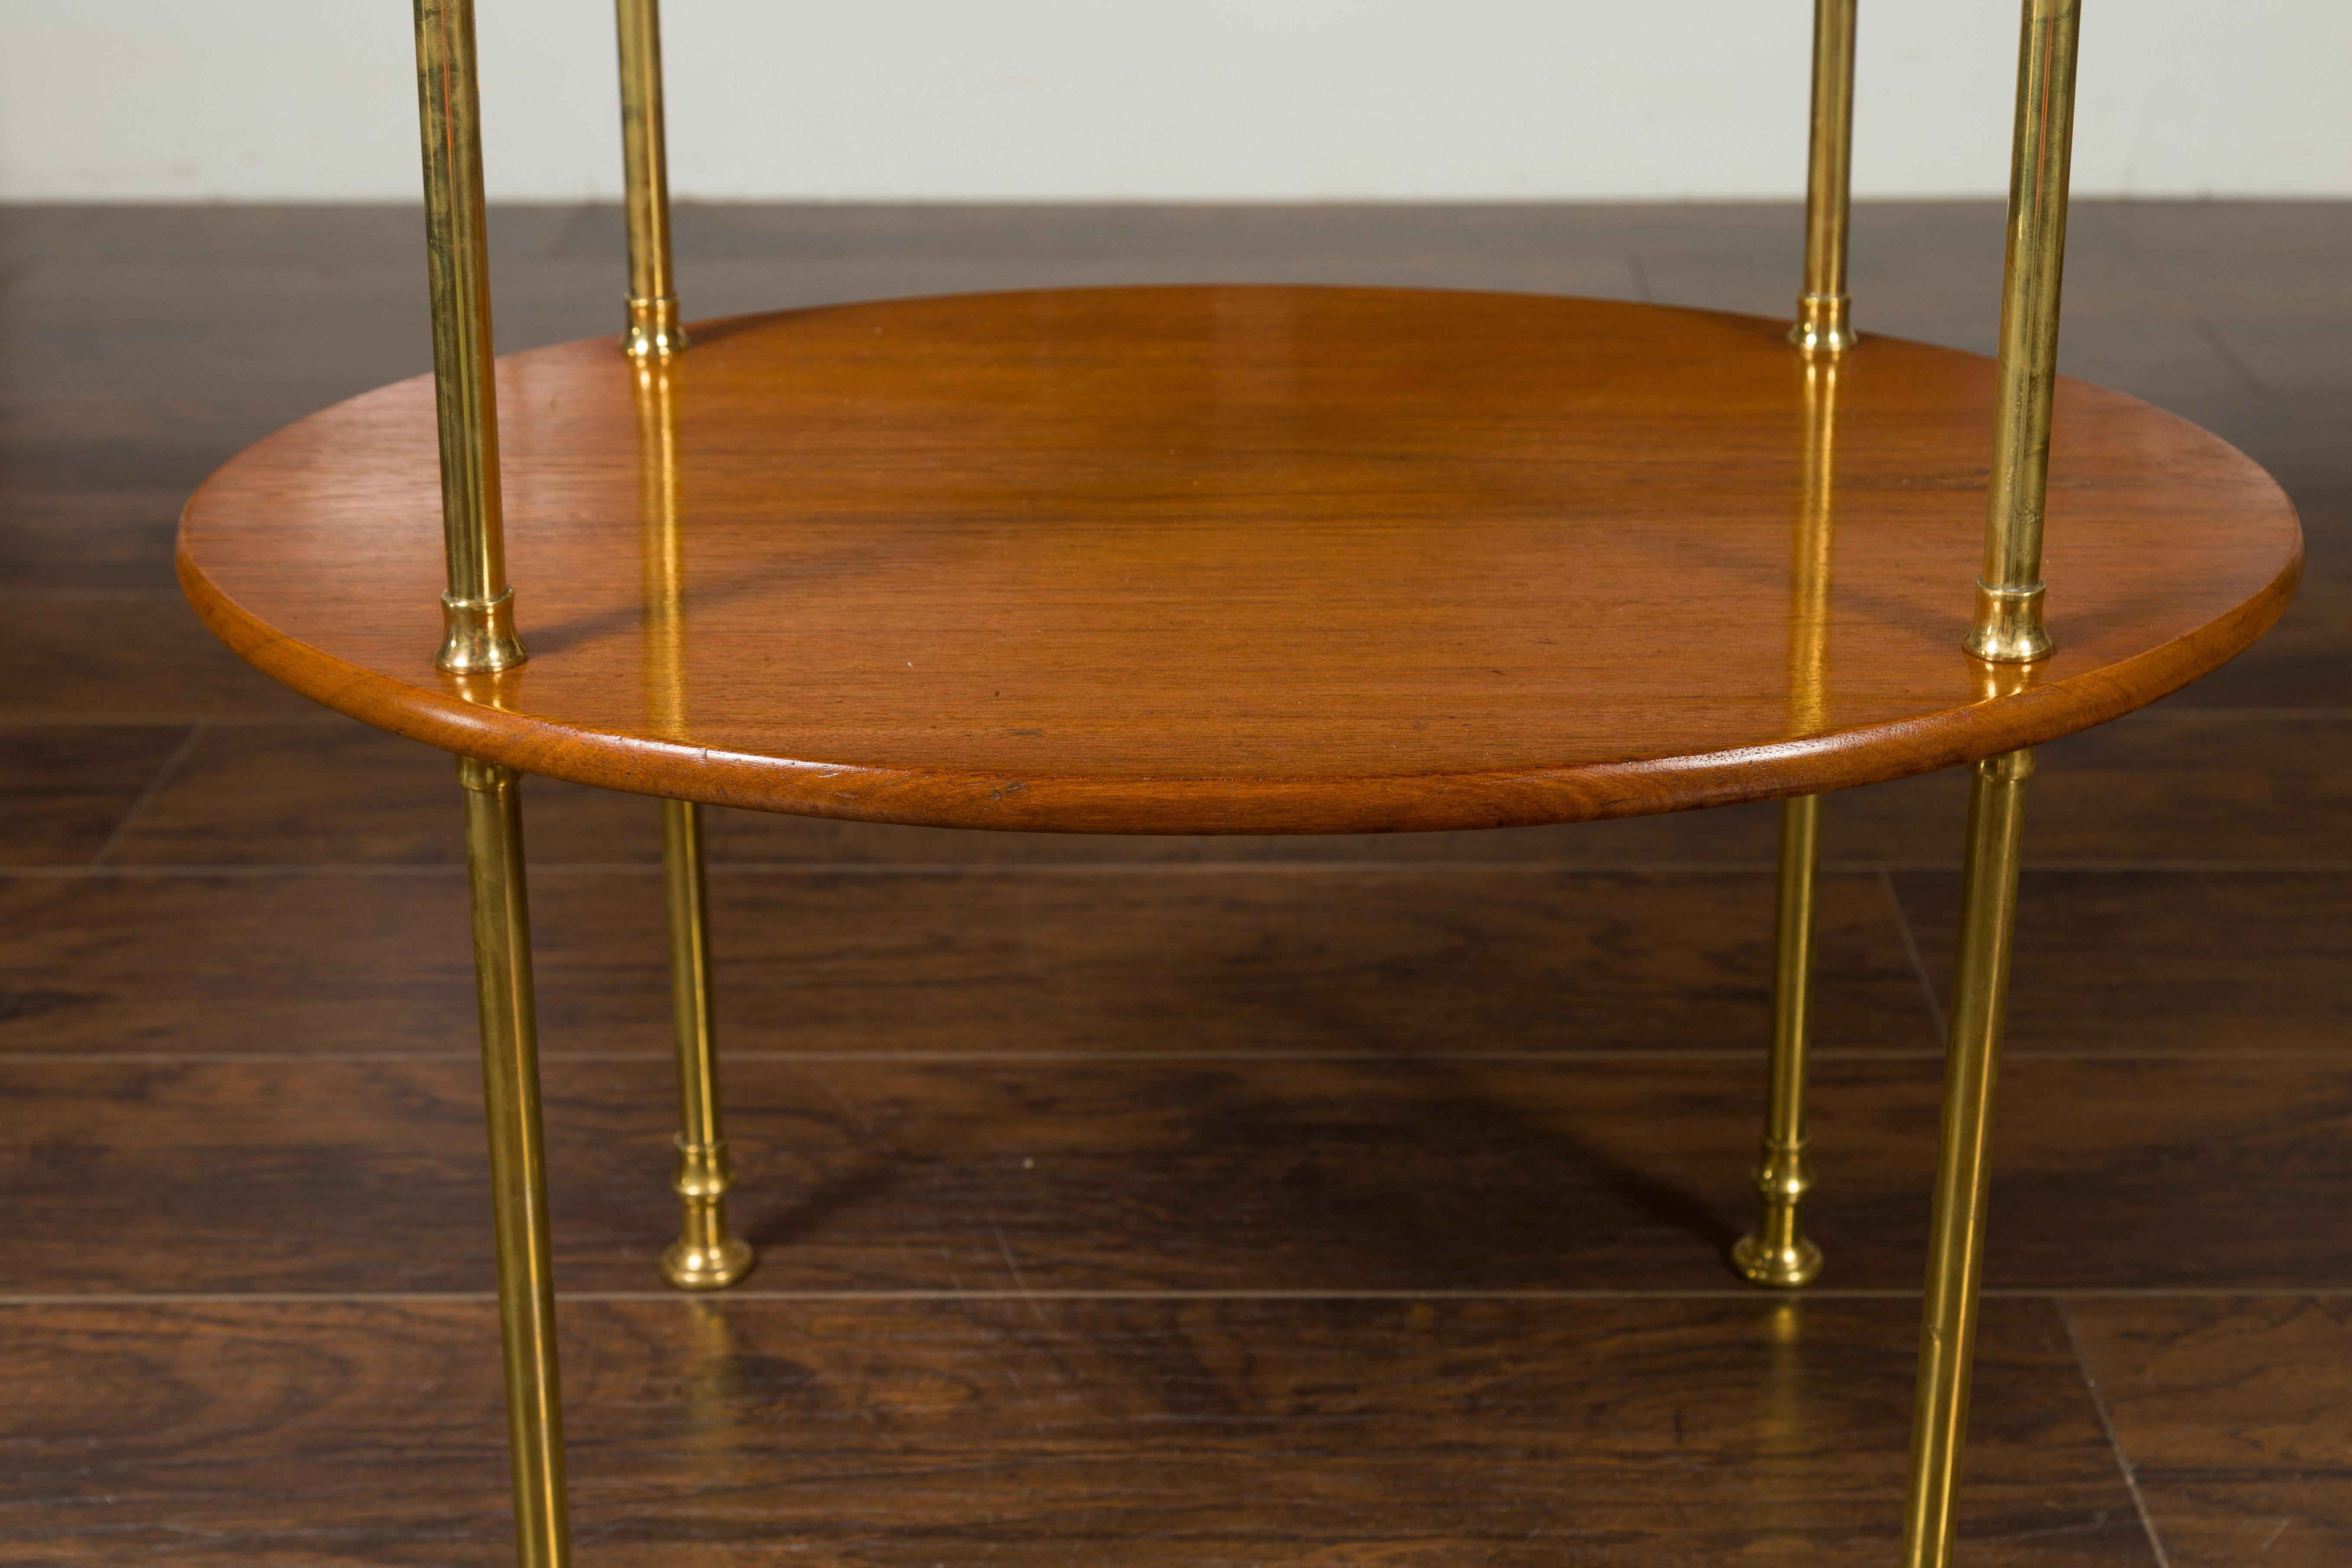 English Midcentury Mahogany Oval Two-Tiered Table with Brass Accents For Sale 2